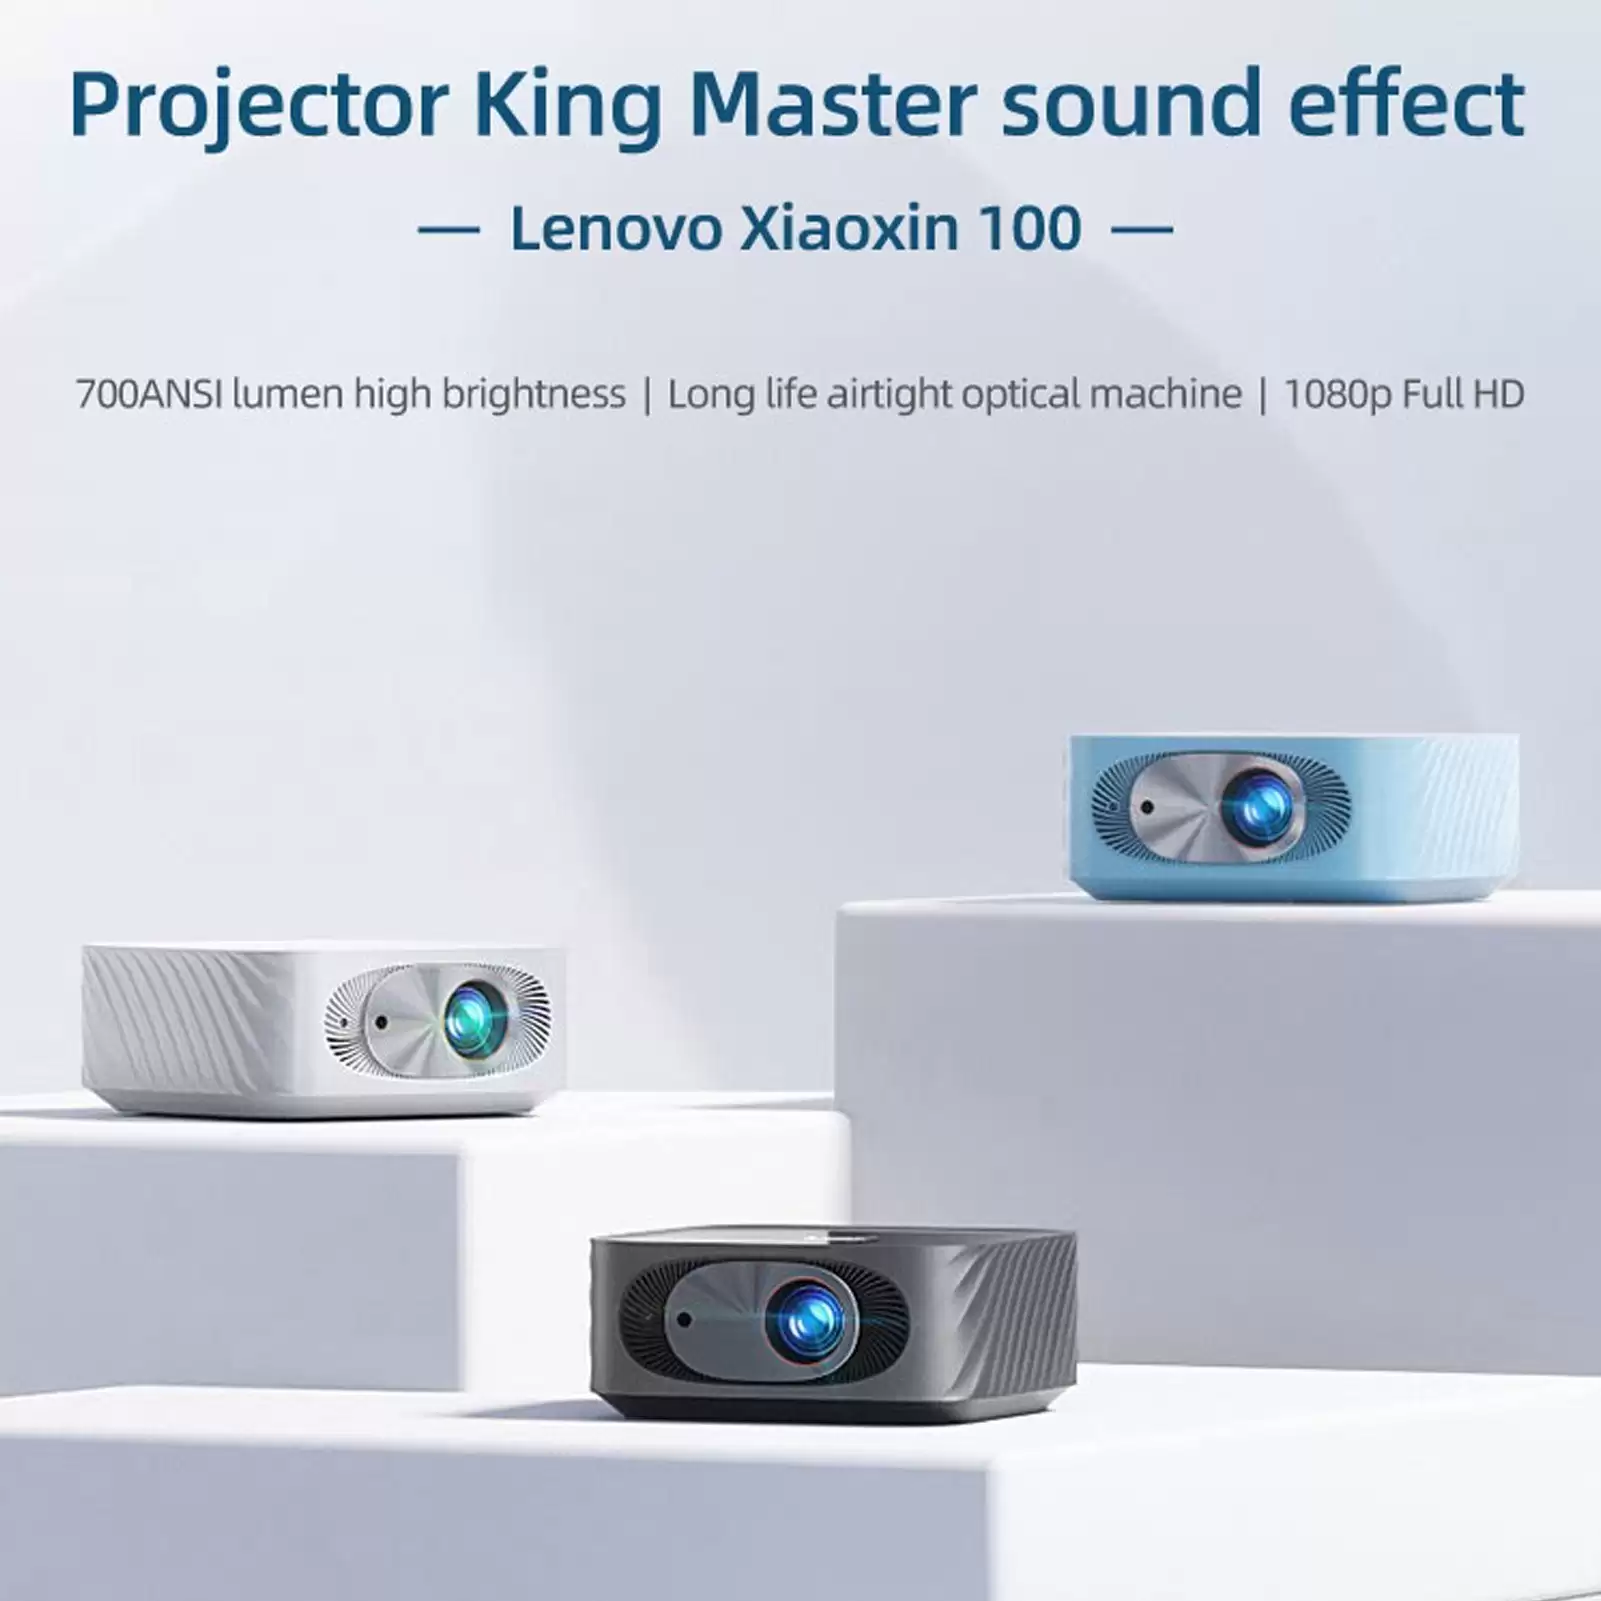 Pay Only $176.69 For Lenovo Xiaoxin 100 Projector + Free Shipping With This Discount Coupon At Cafago